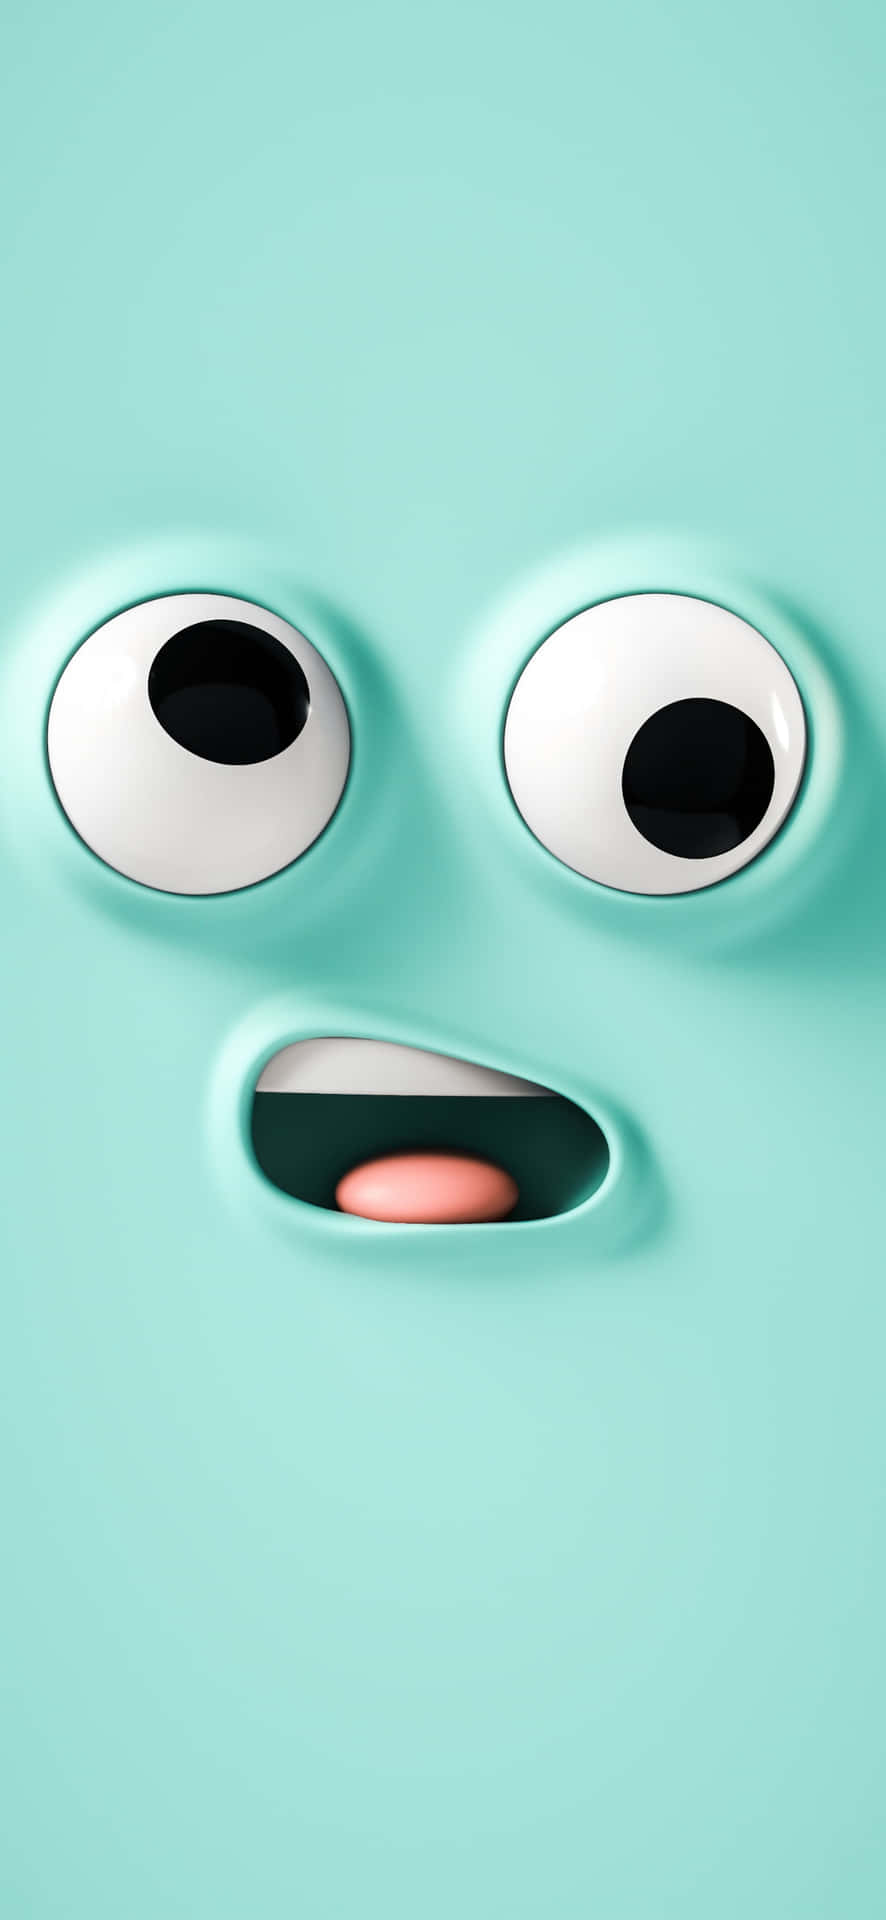 A close up of a blue-green face with big eyes and a mouth open in a surprised expression. - IPhone